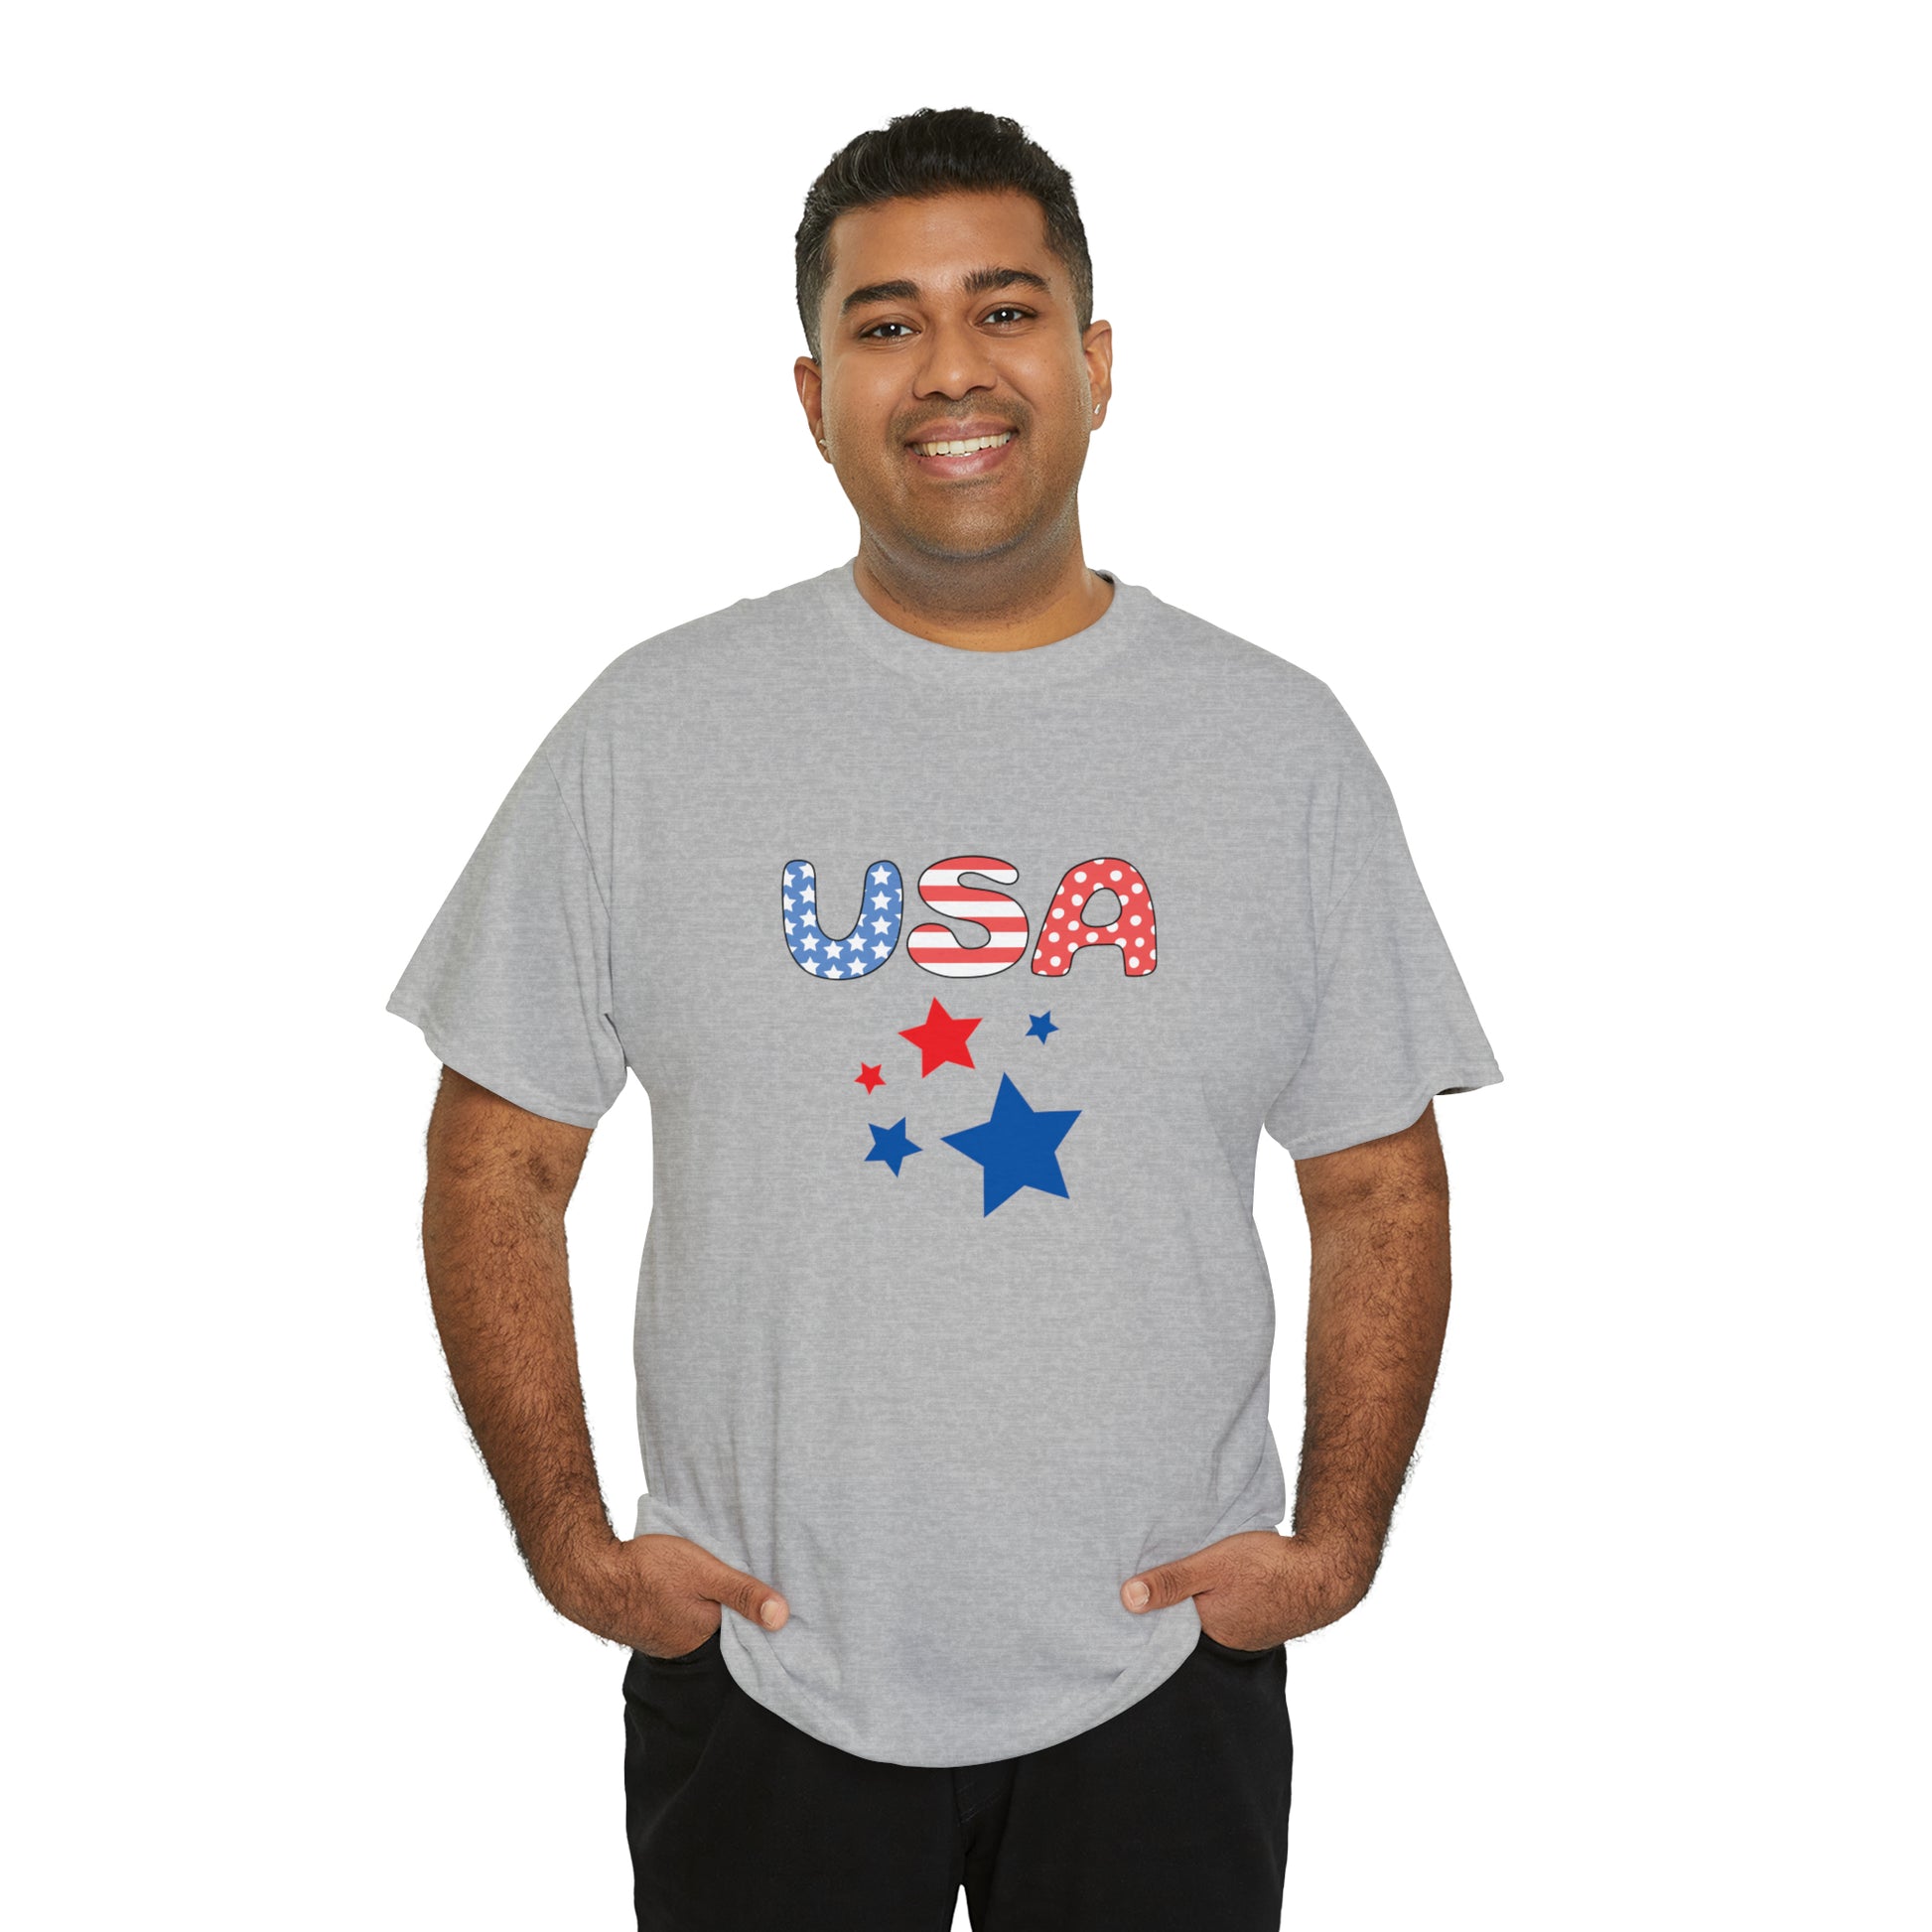 Mock up of a man wearing the Sport Grey t-shirt